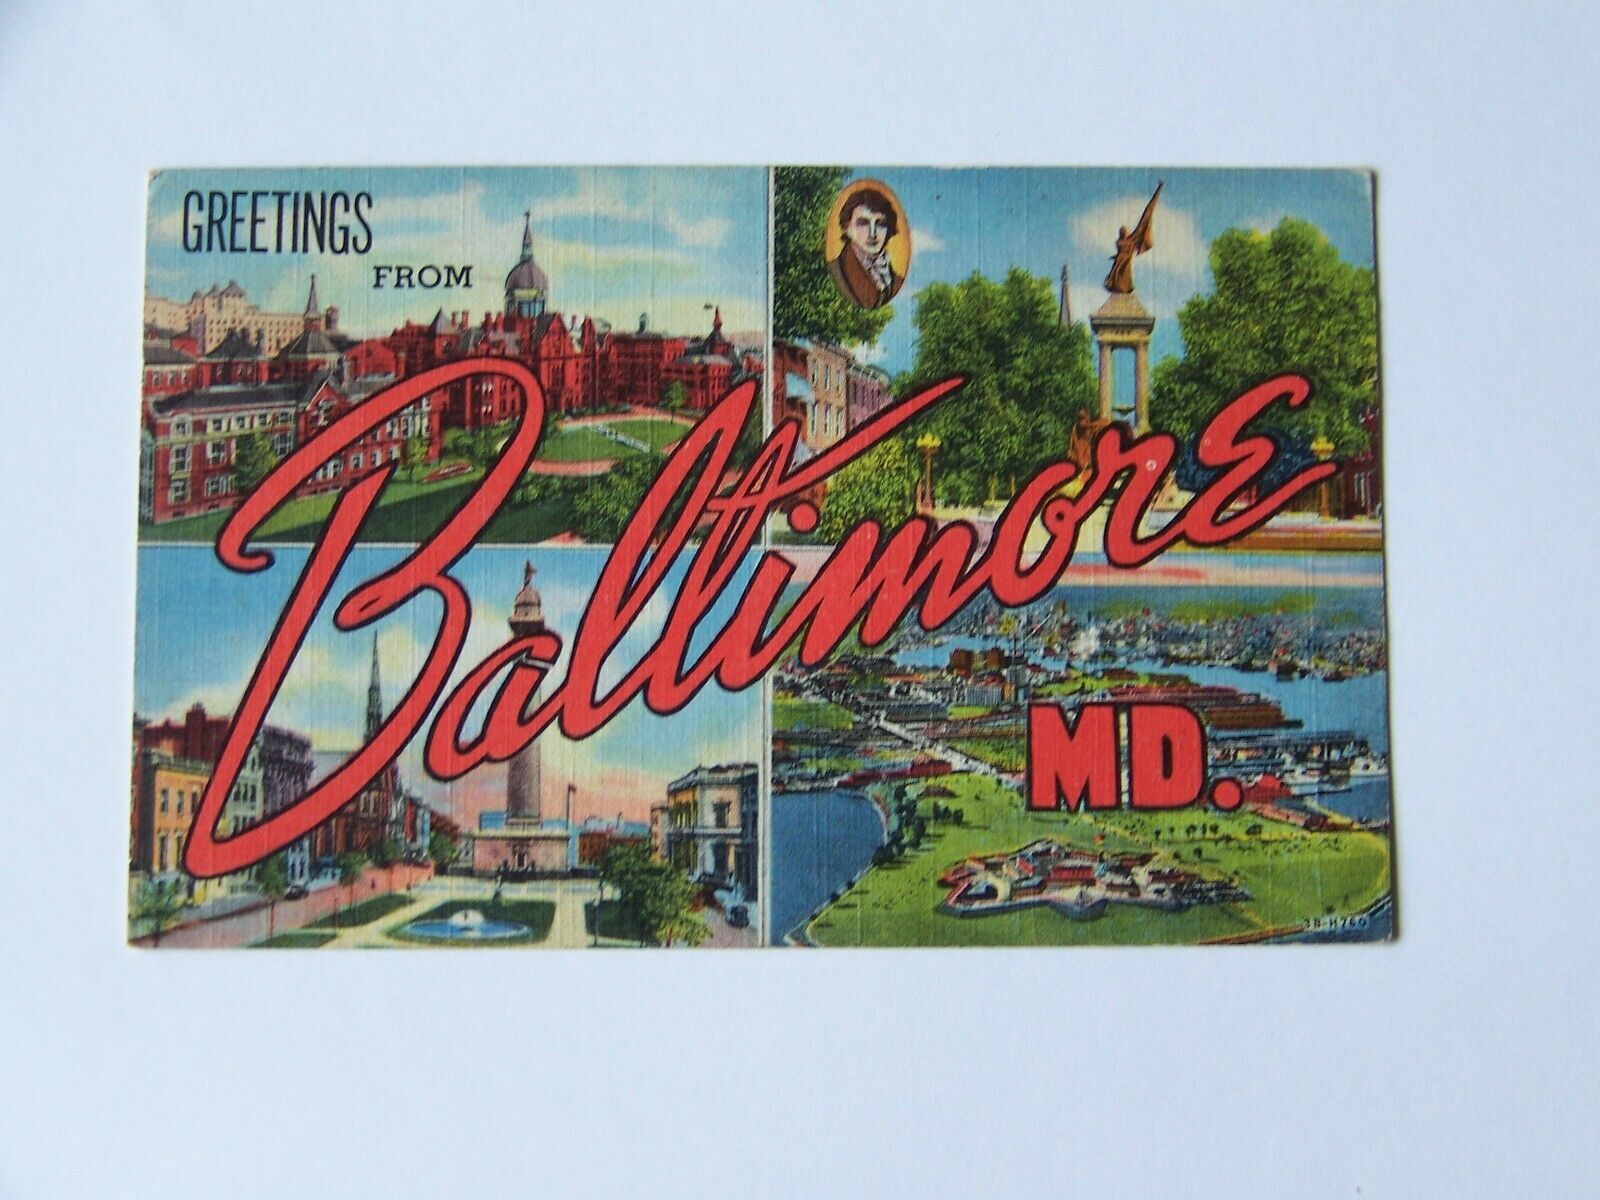 Baltimore Maryland MD Large Letter Greetings 1944